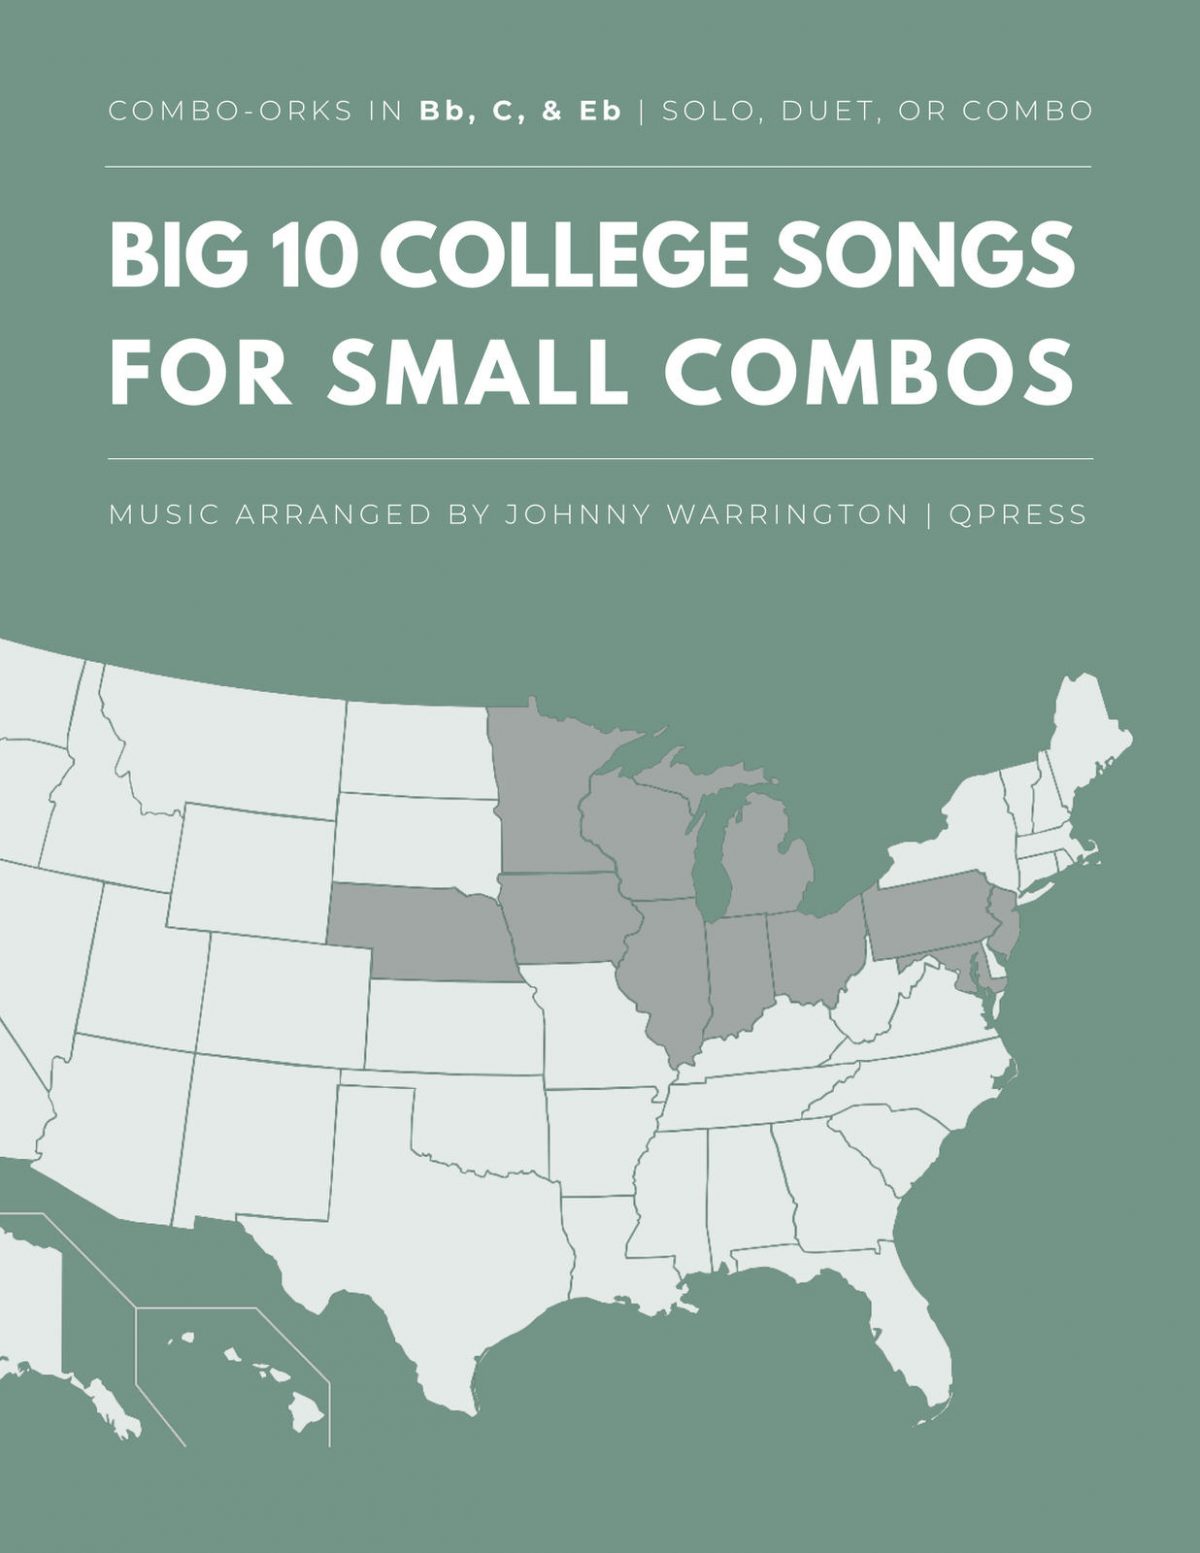 College songs featured